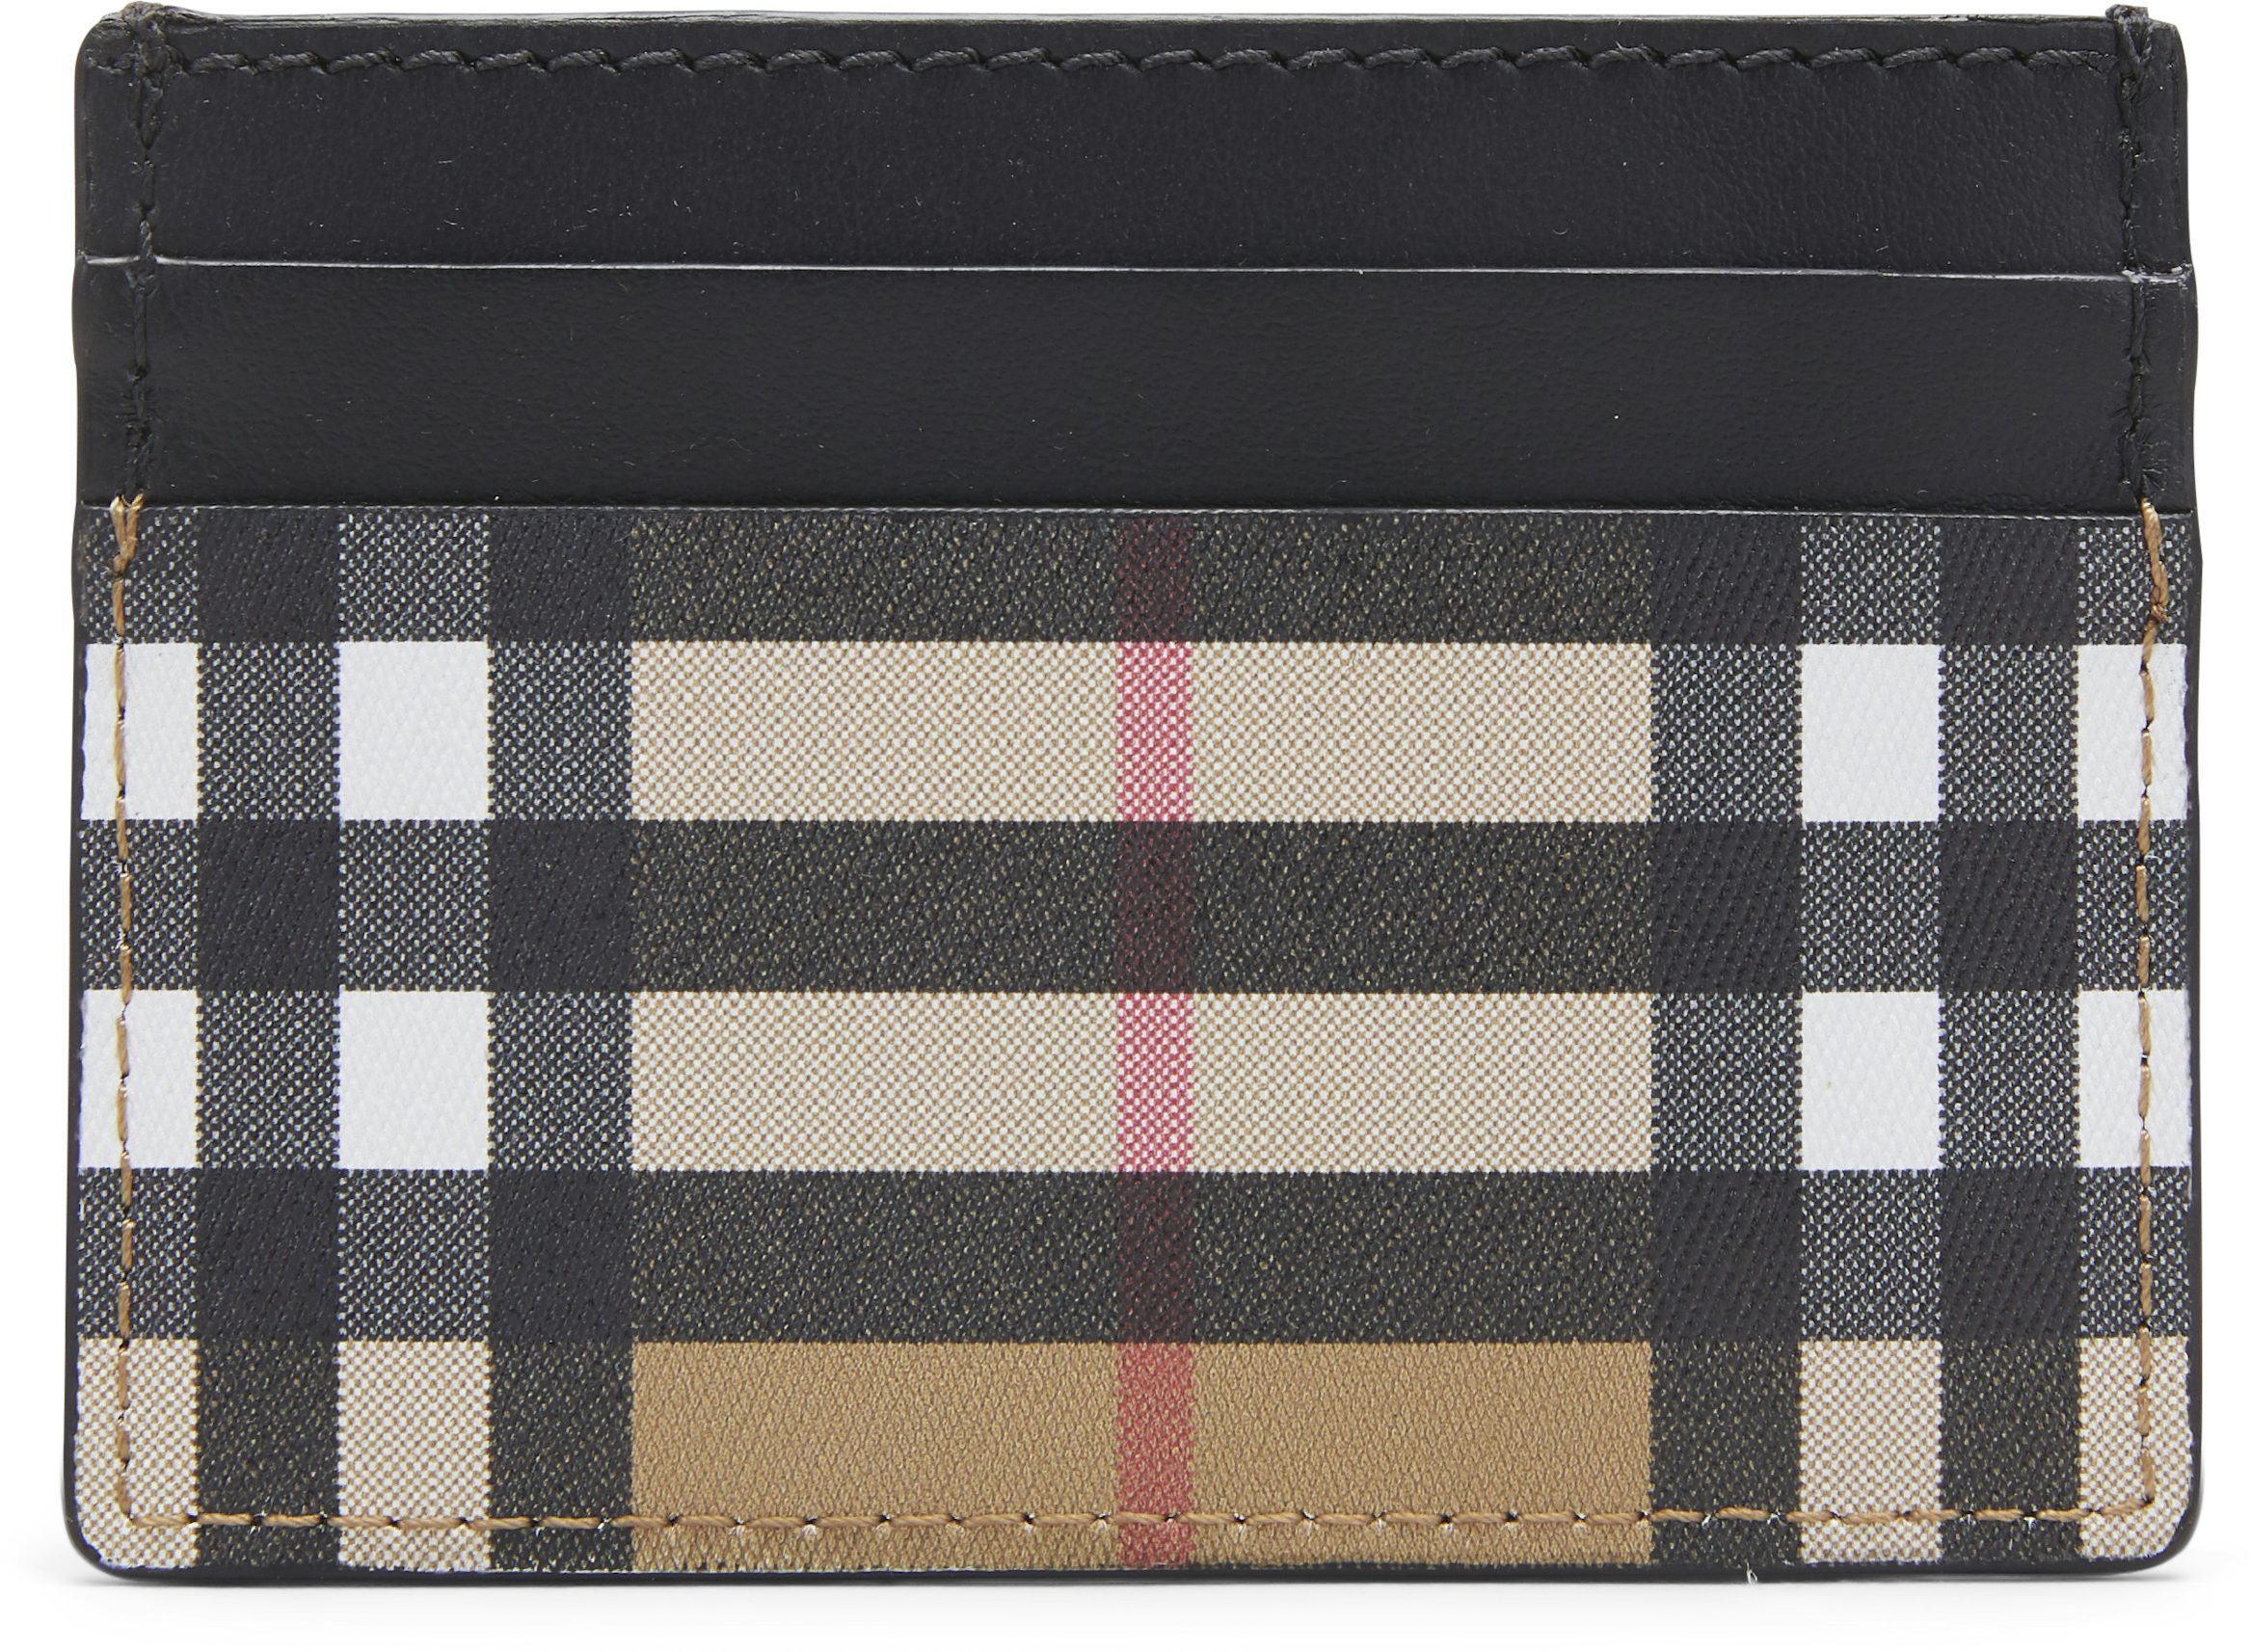 Burberry Vintage Check and Leather Card Case 4 Slot Black in